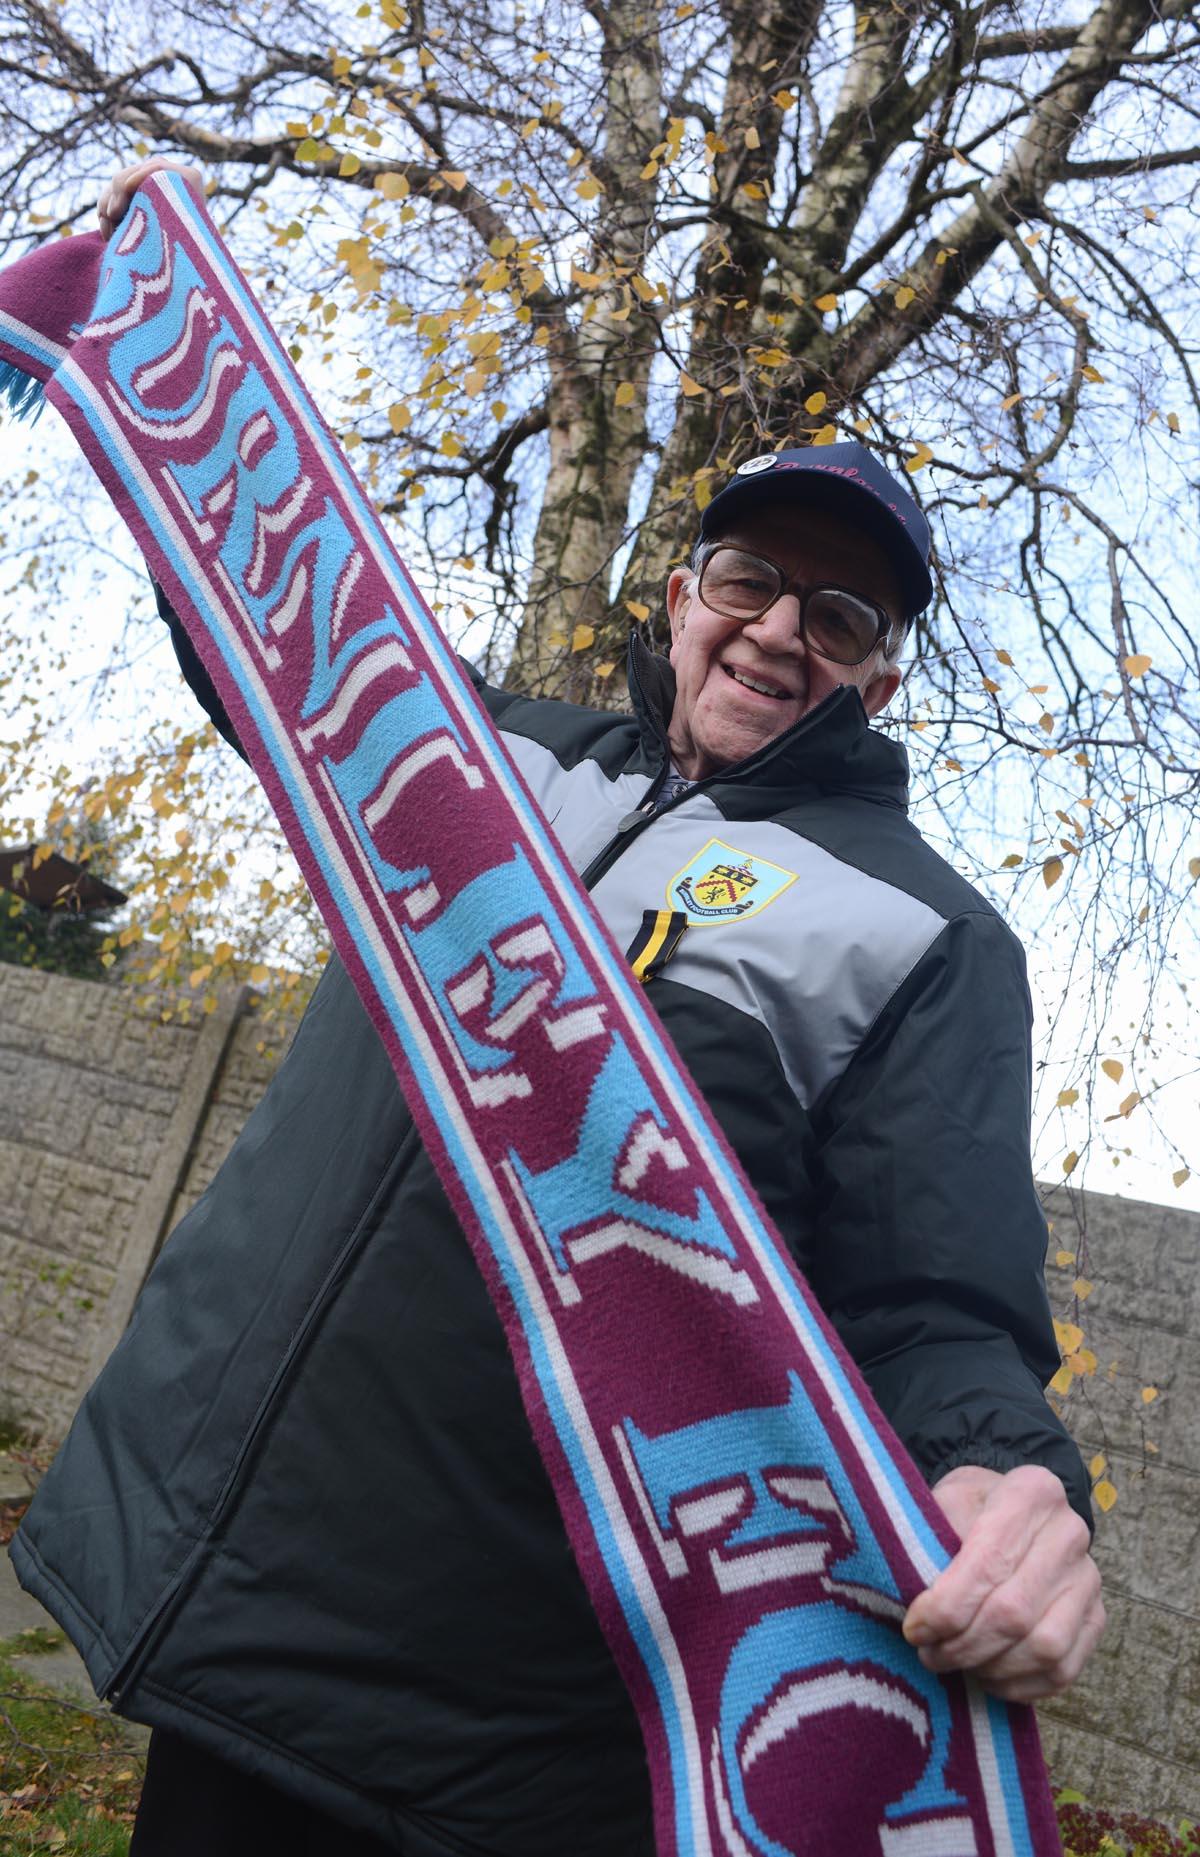 Jim Thompson 85, from Burnley, has worked on the turn styles of Burnley FC for 65 years. He has been presented an award on Oct 7th 2013. by the Duke of Cambridge for Grassroots Football, recognition of exceptional service.